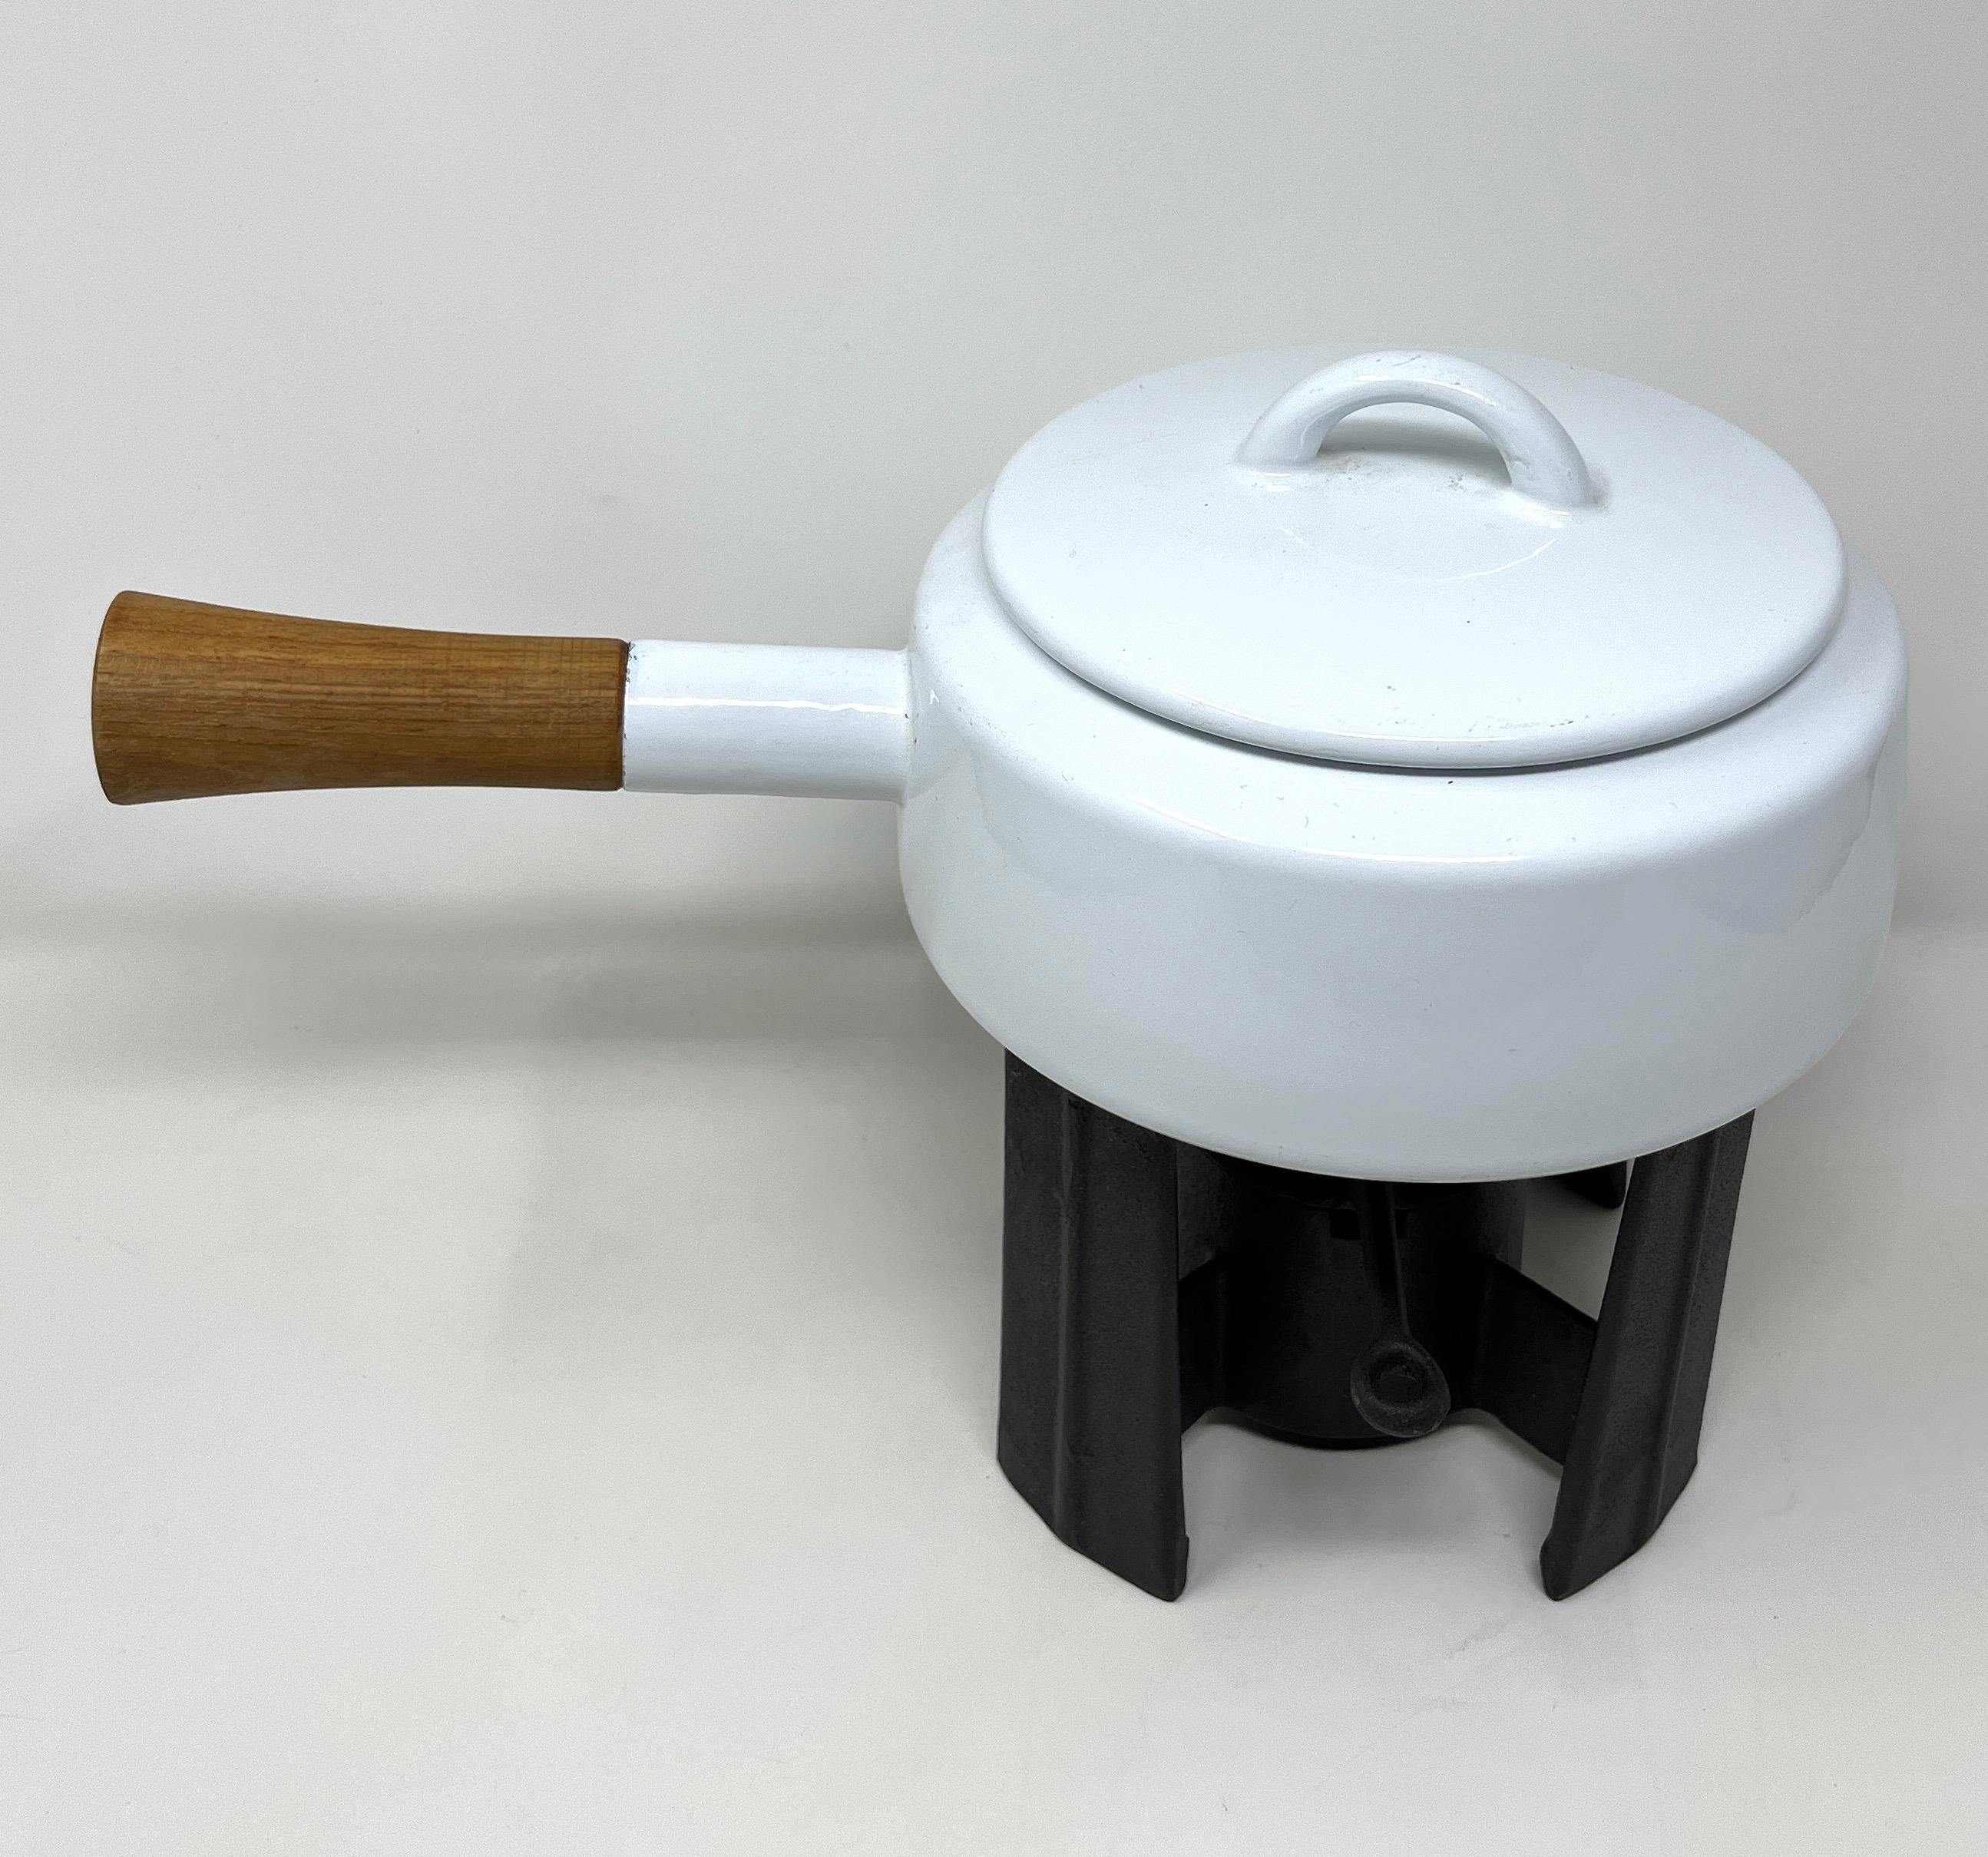 Sculptural, striking, very nice and clean 1970s fondue pot in white enameled finish with white interior, solid teak handle and cast iron base. Designed by Jens Quistgaard and produced by Dansk. The colors white (and black) were introduced in 1971